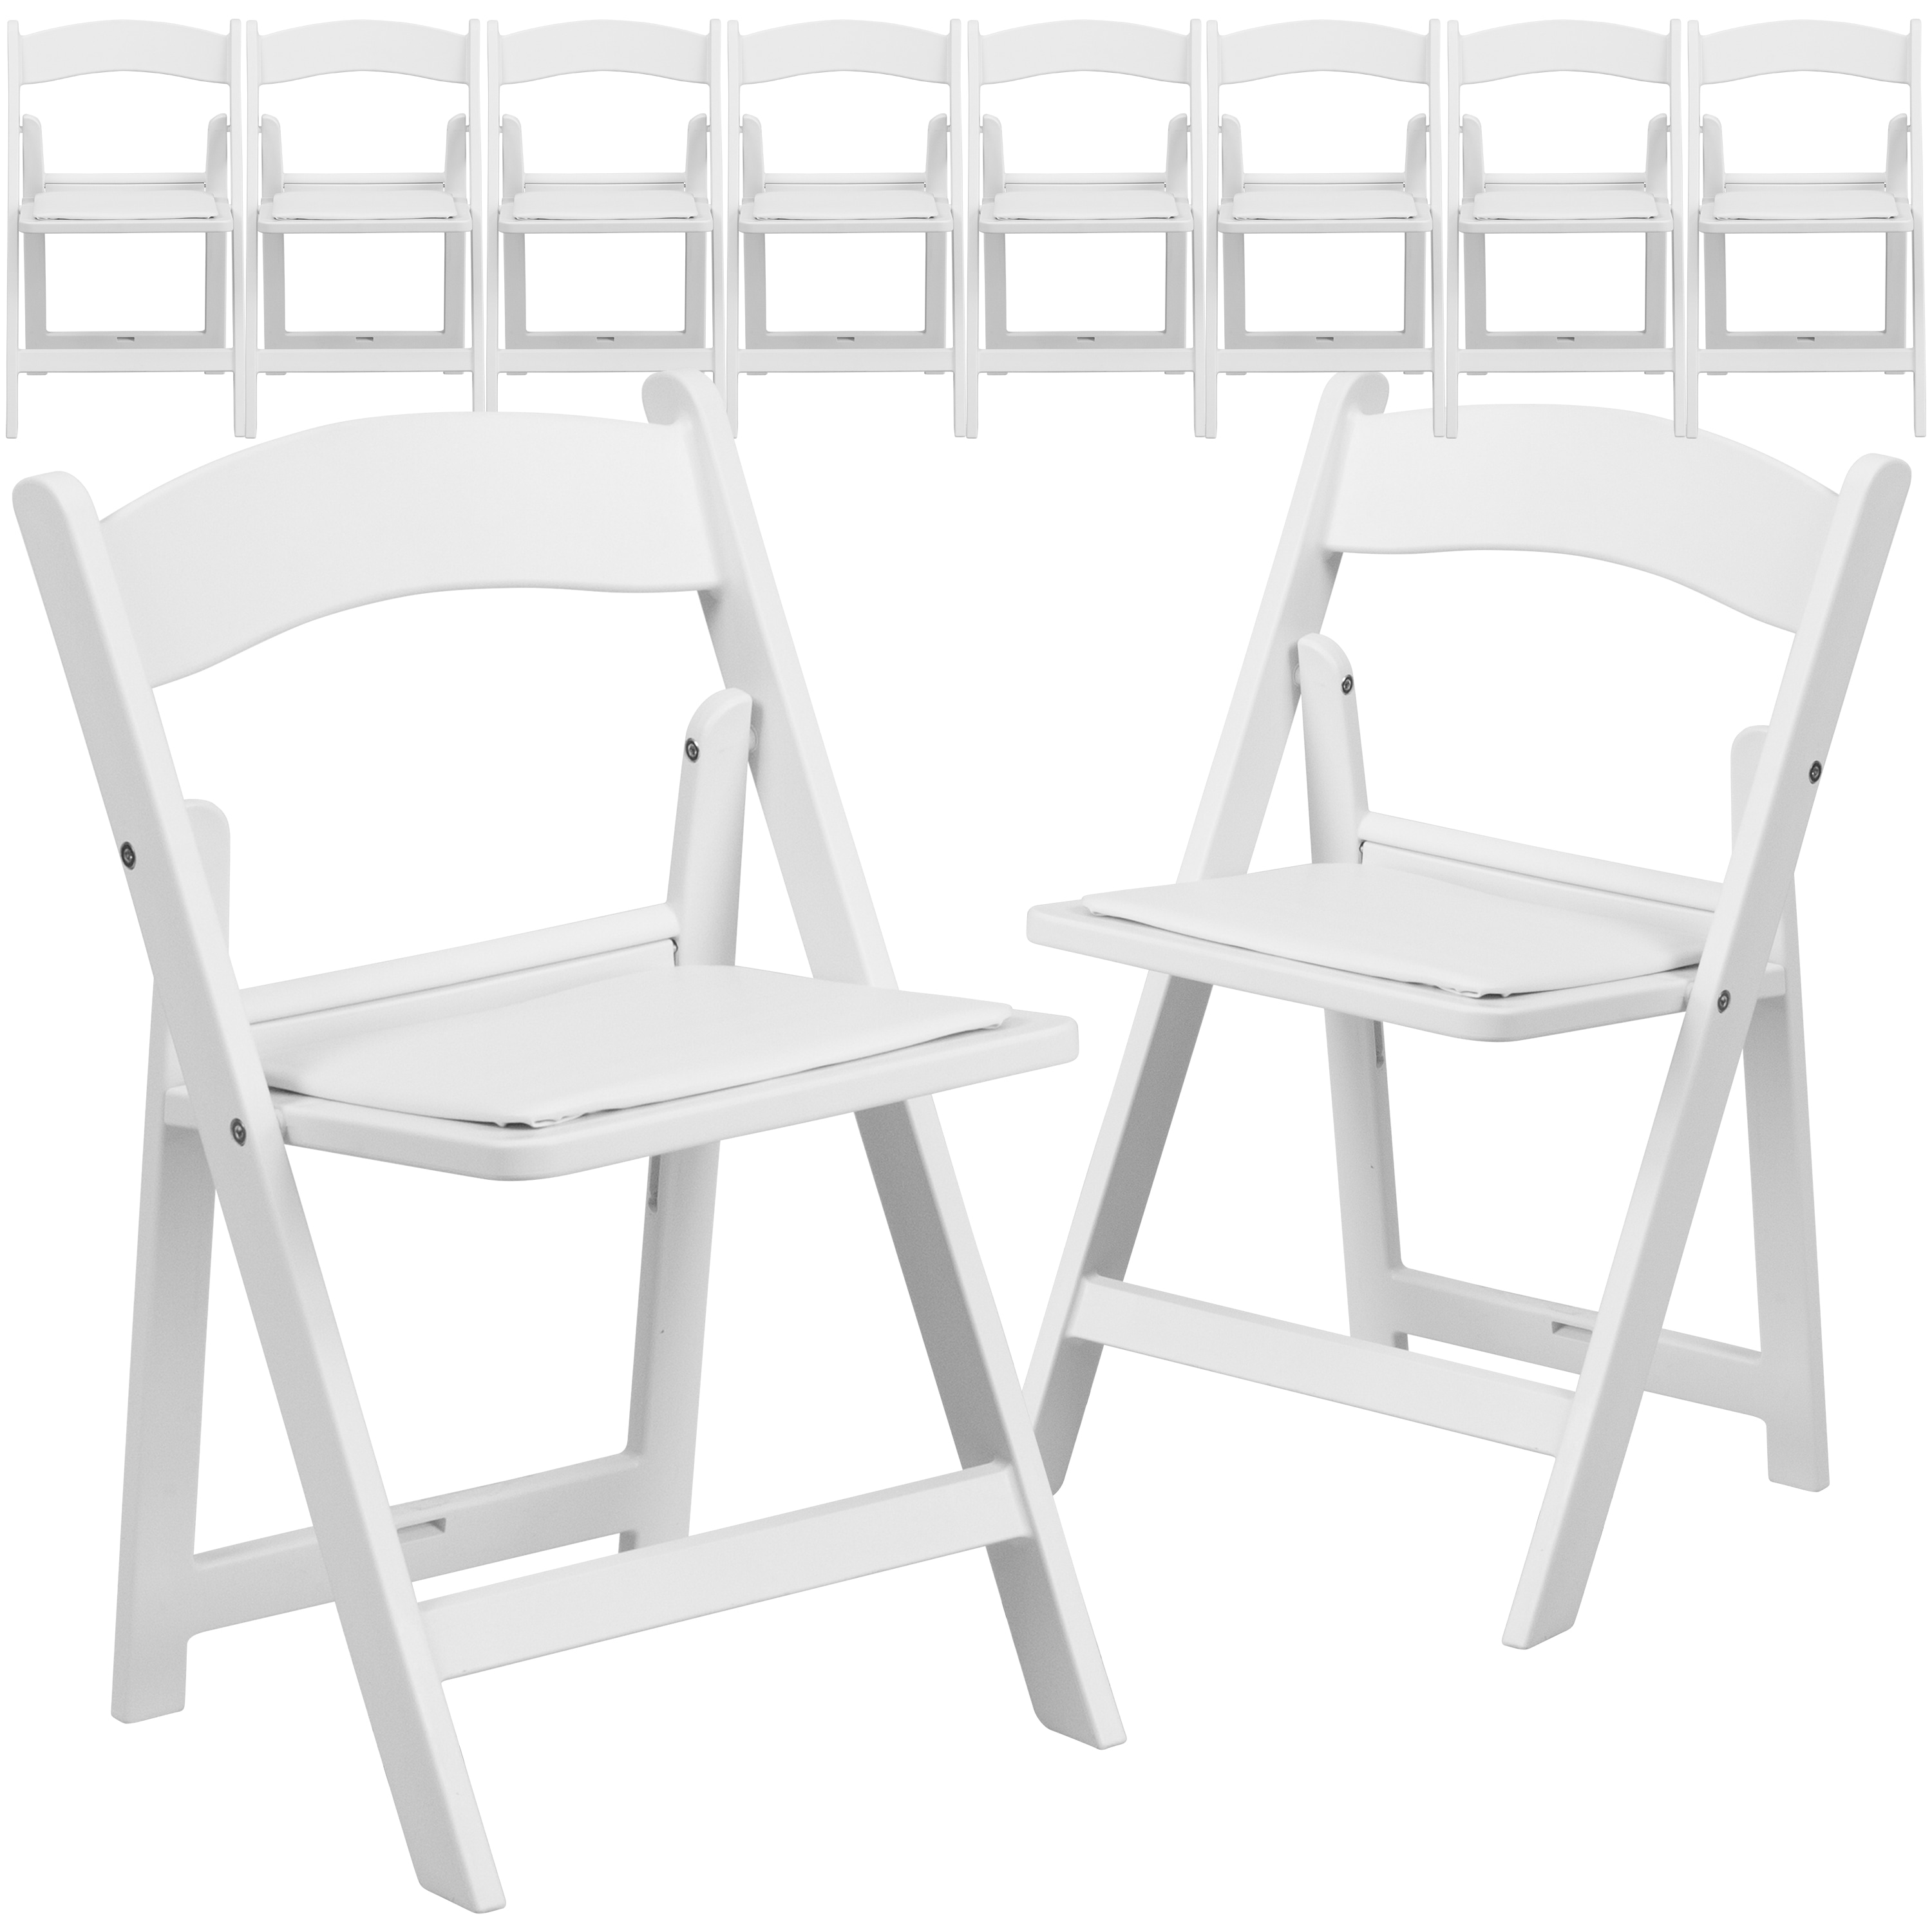 Folding Tables & Chairs Home & Kitchen Flash Furniture 10 Pack ...